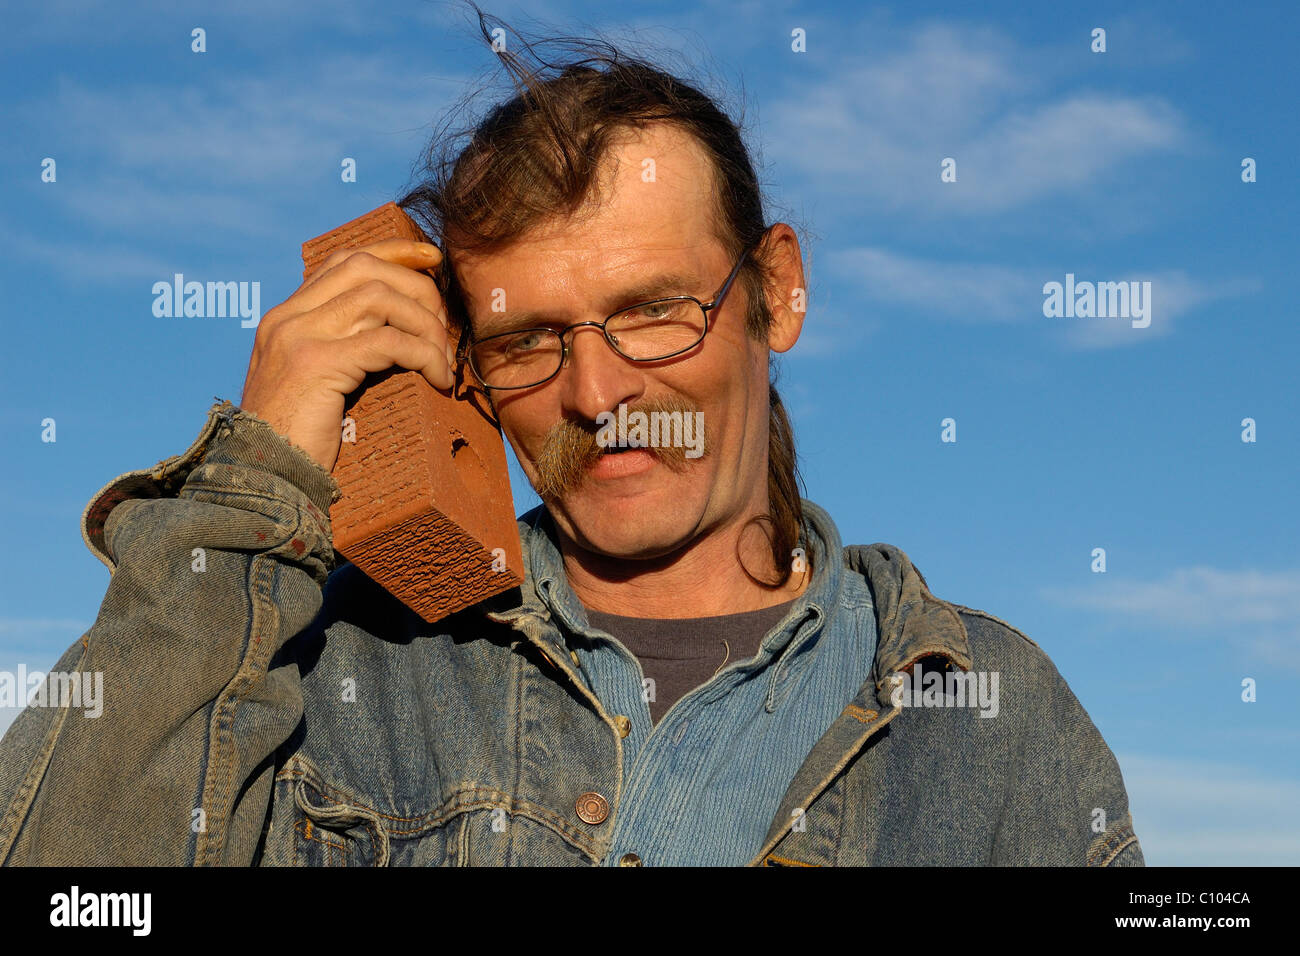 A scruffy man uses a brick as a cell phone Stock Photo